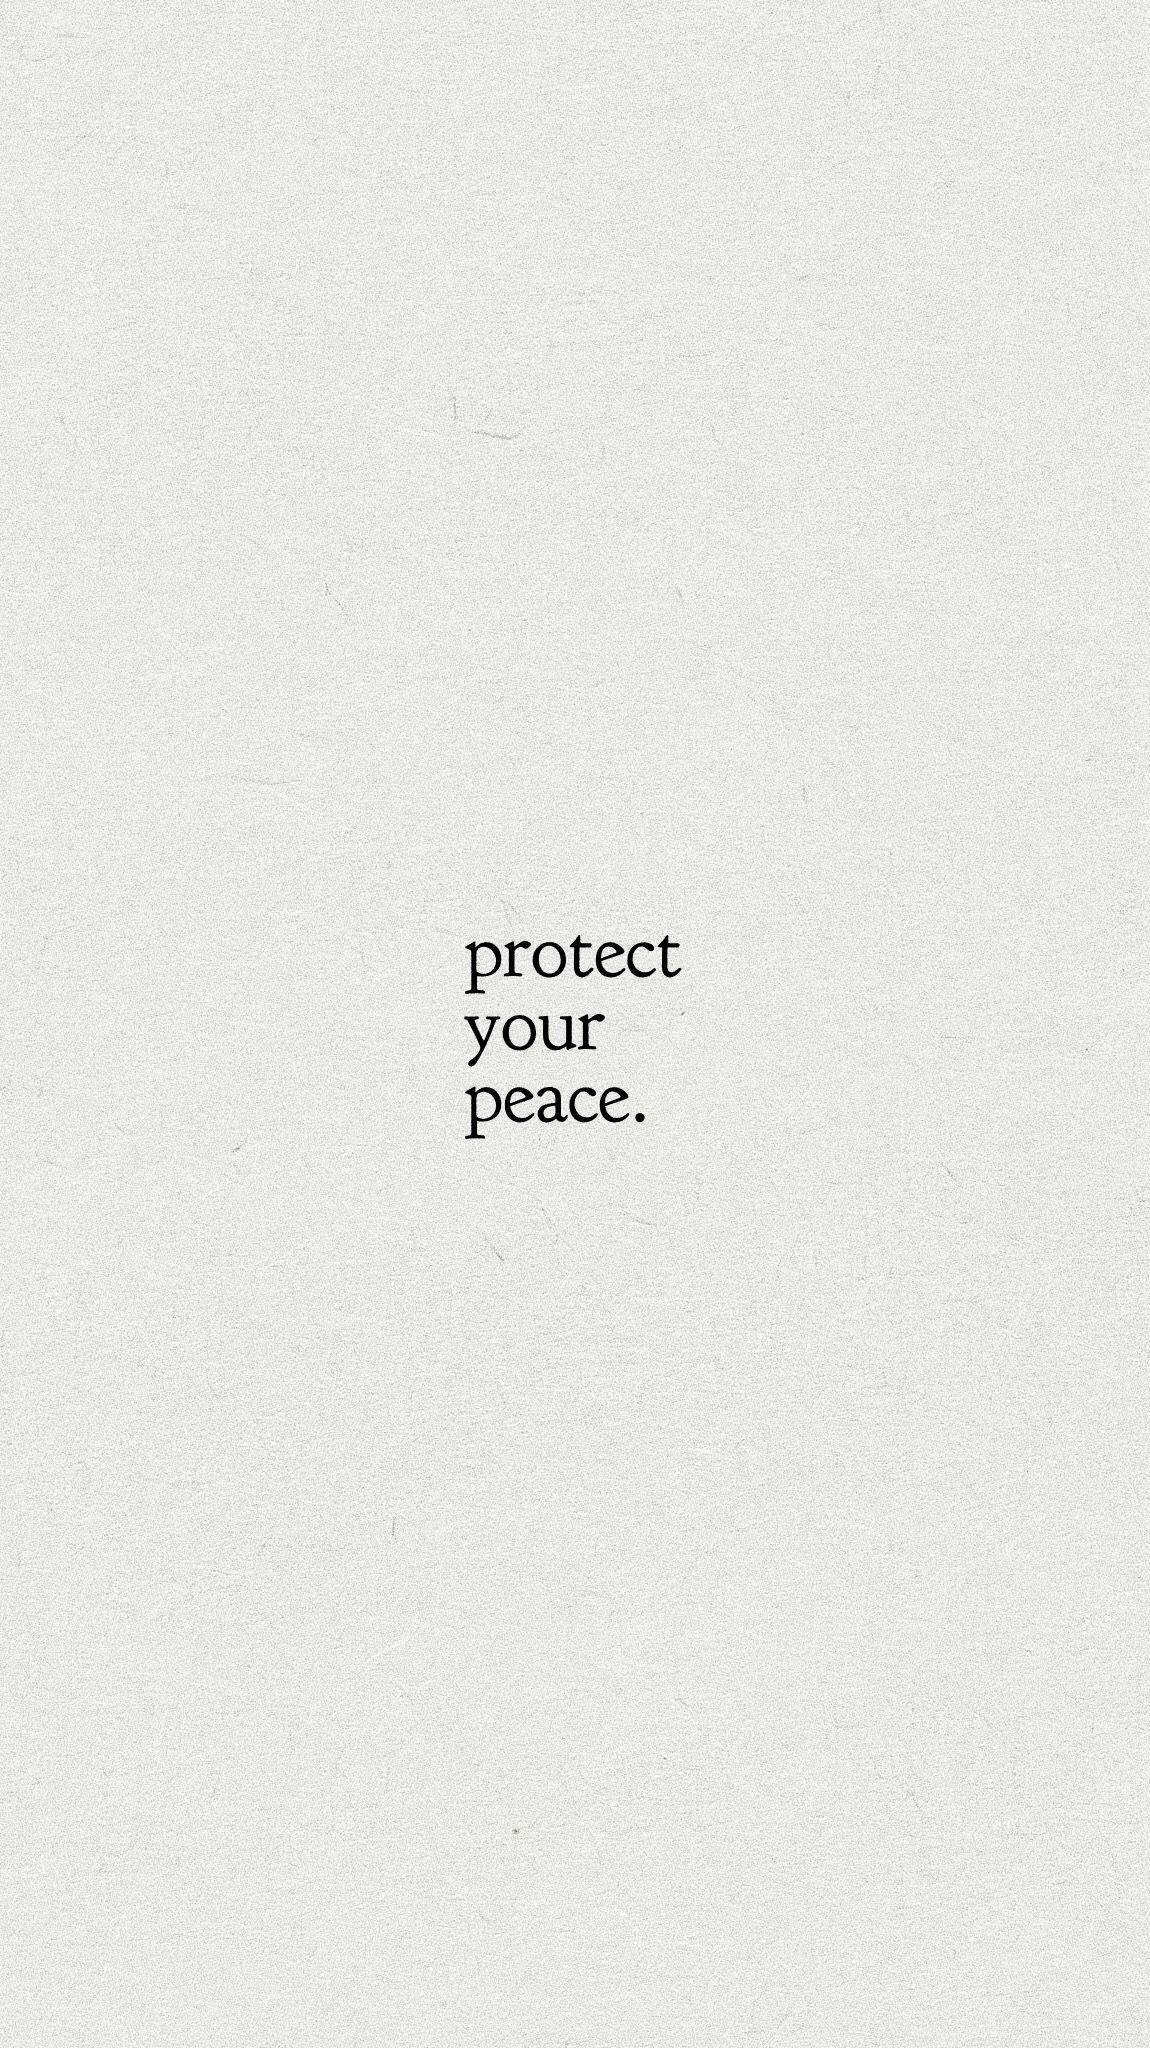 Protect your peace - Peace